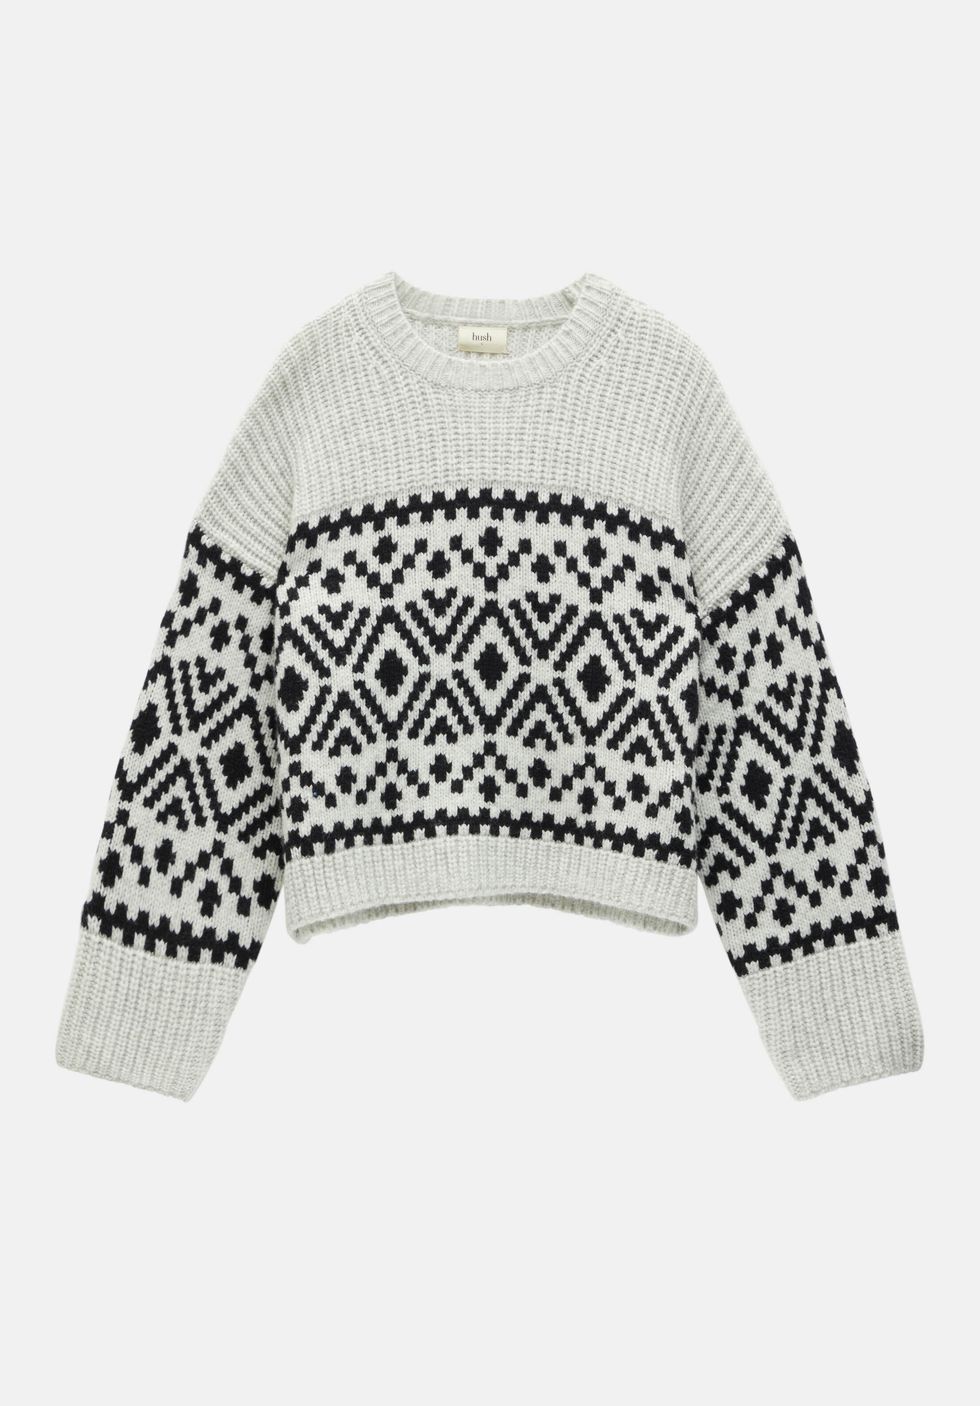 M&S' new knitted jumper named must-buy of autumn/winter 2023